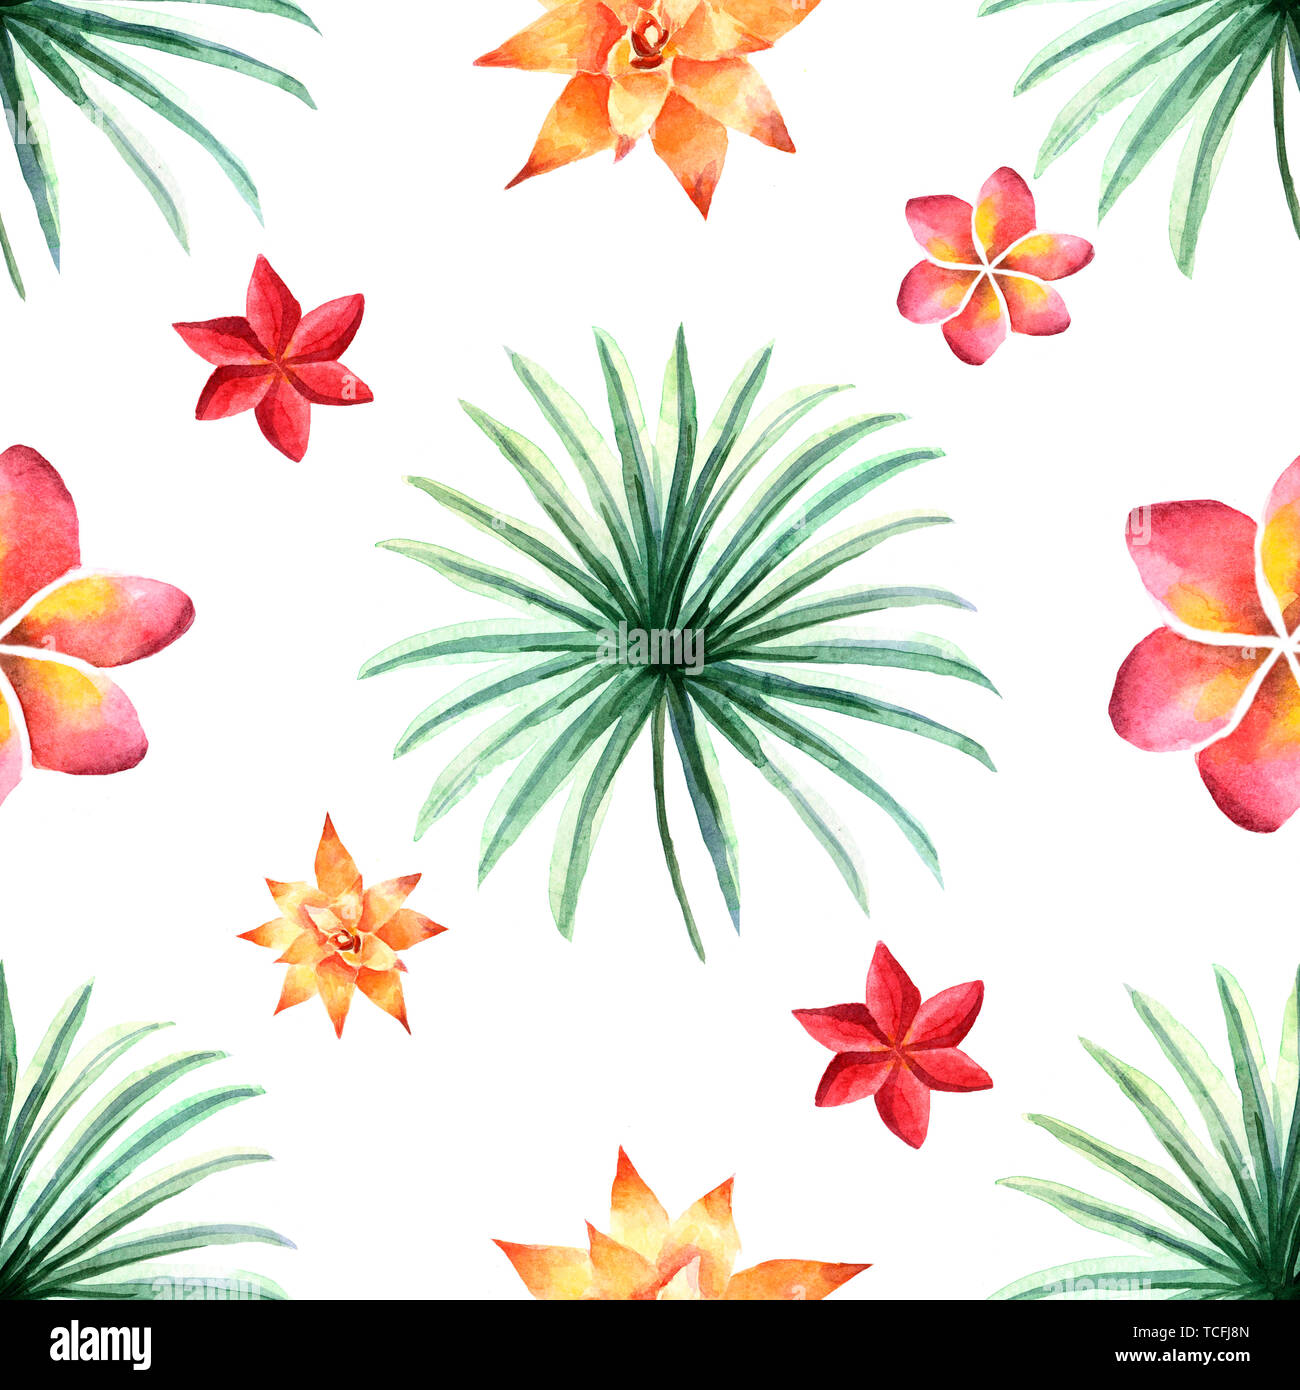 Watercolor summer seamless pattern with tropical flowers Stock Photo